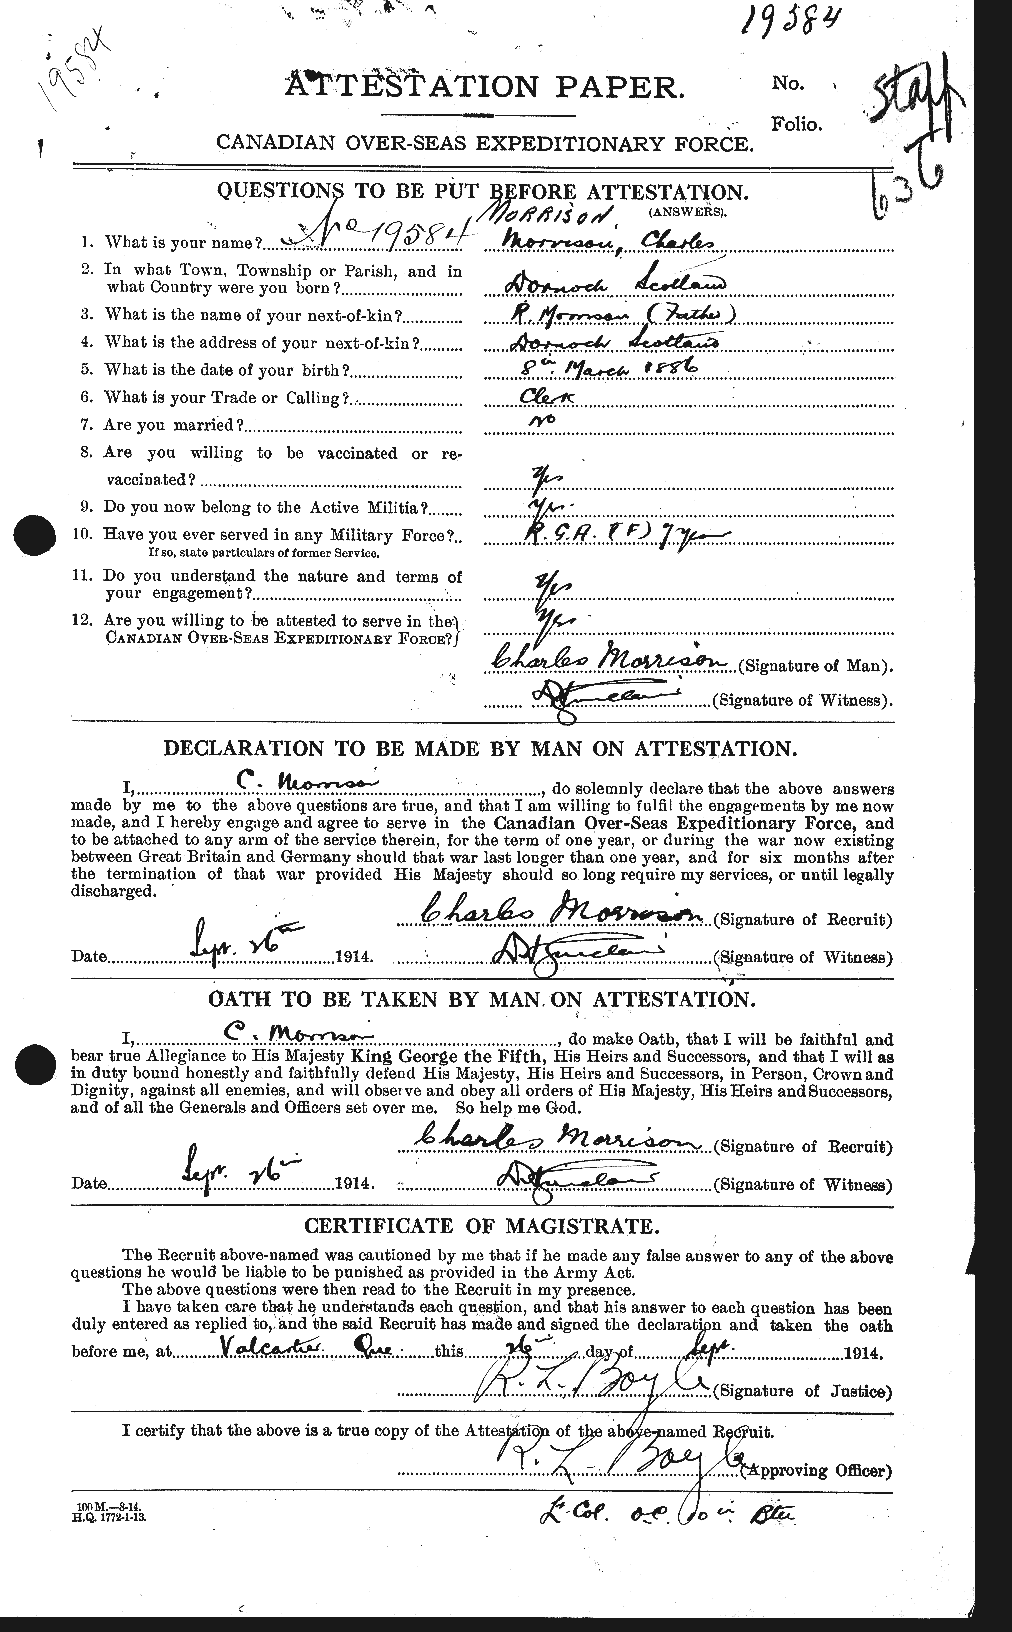 Personnel Records of the First World War - CEF 505349a